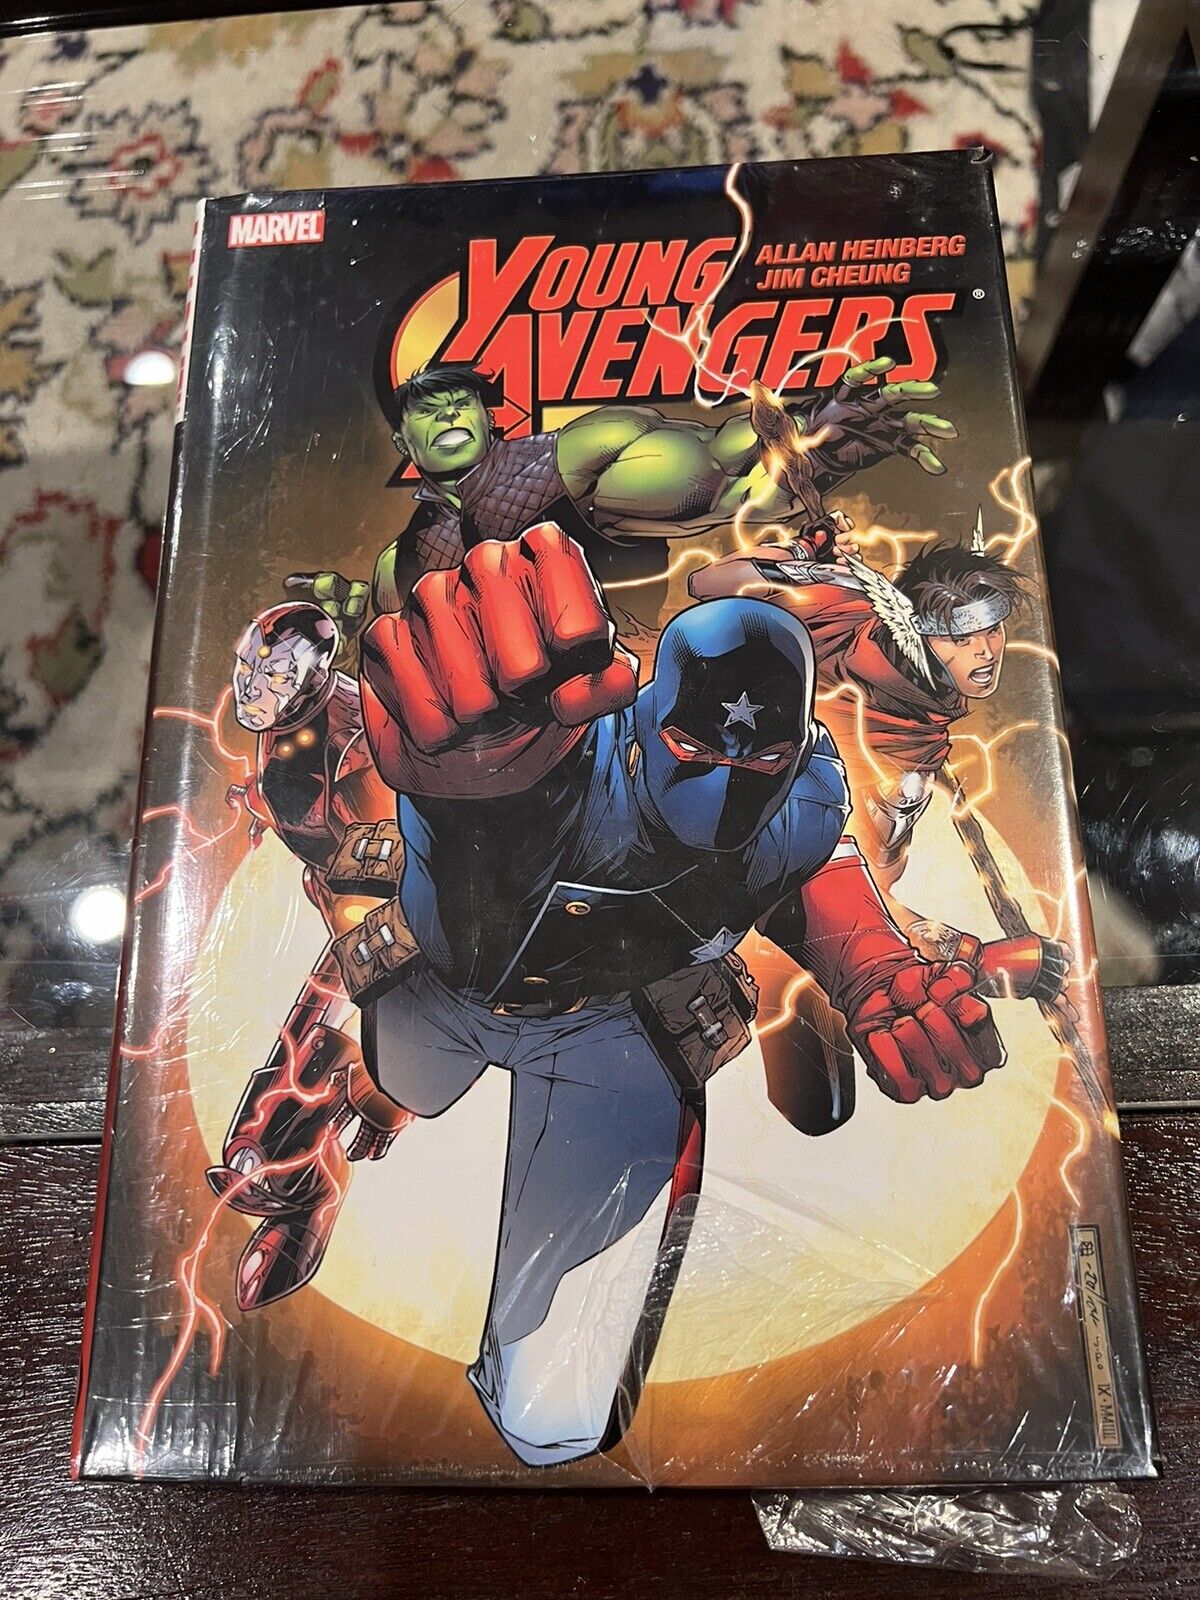 Young Avengers SEALED HC LOT Heinberg & Cheung, Gillen & McKelvie VARIANT COVER